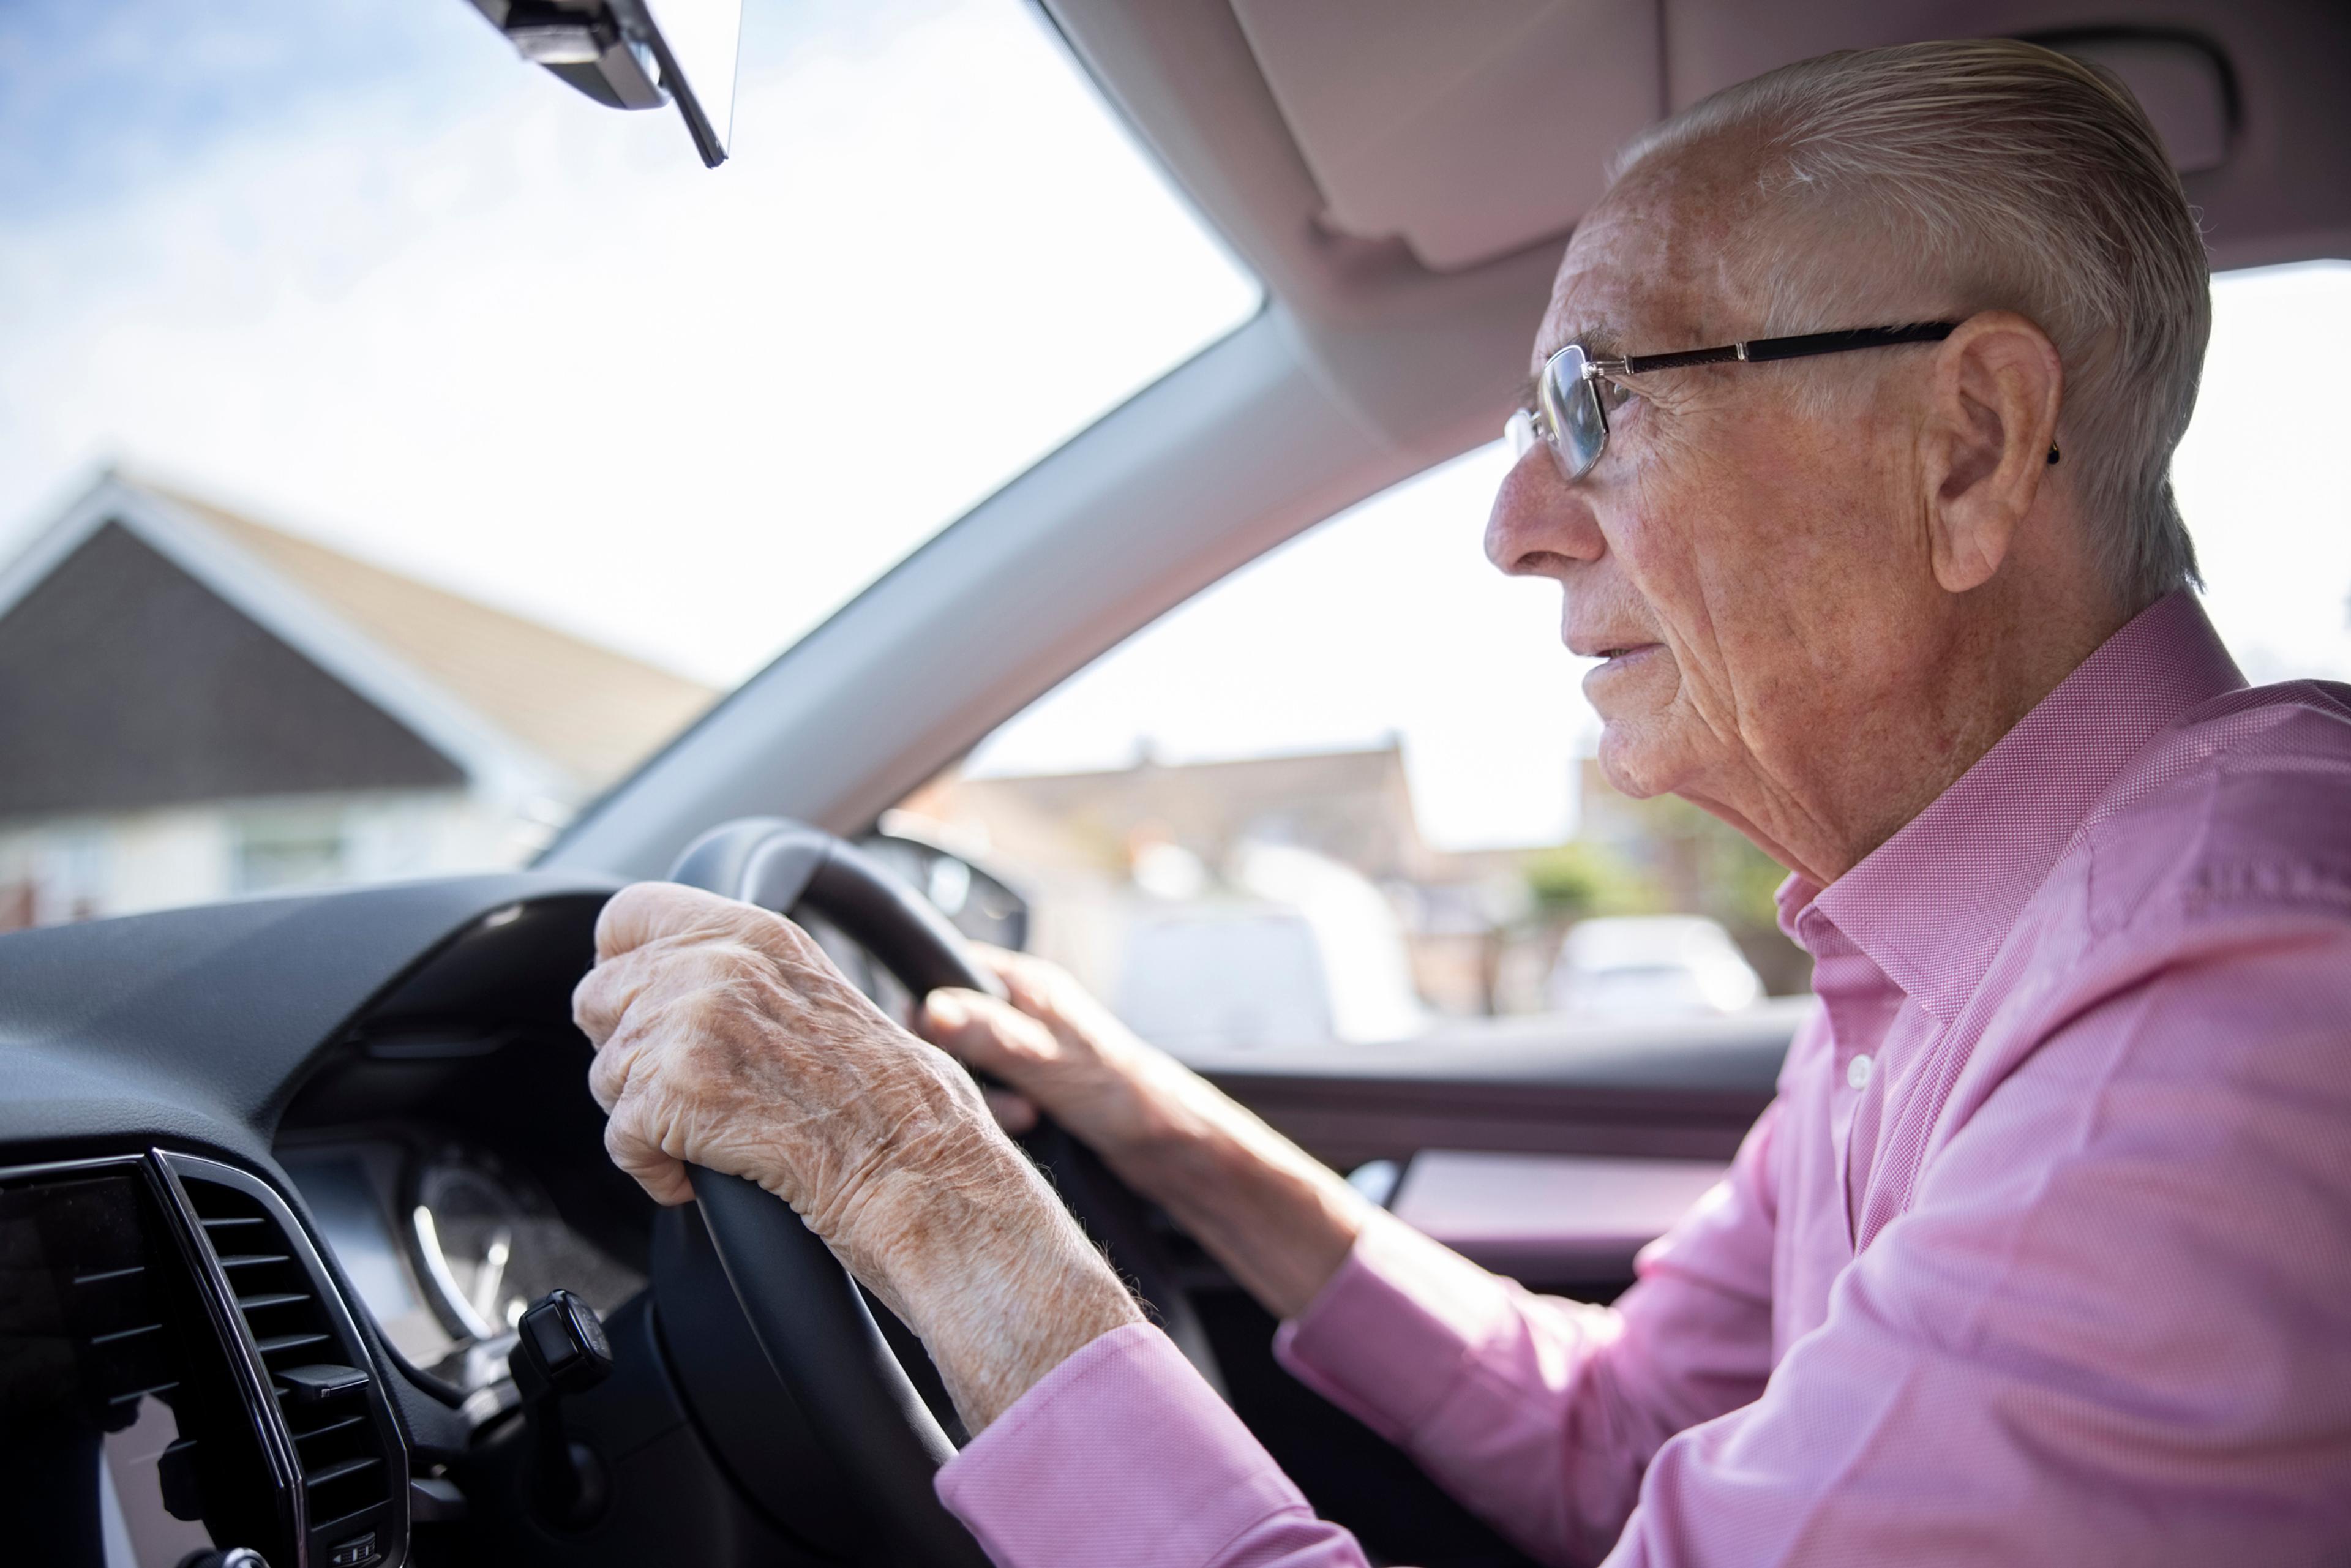 Older Driver Safety: When It's Time to Stop Driving